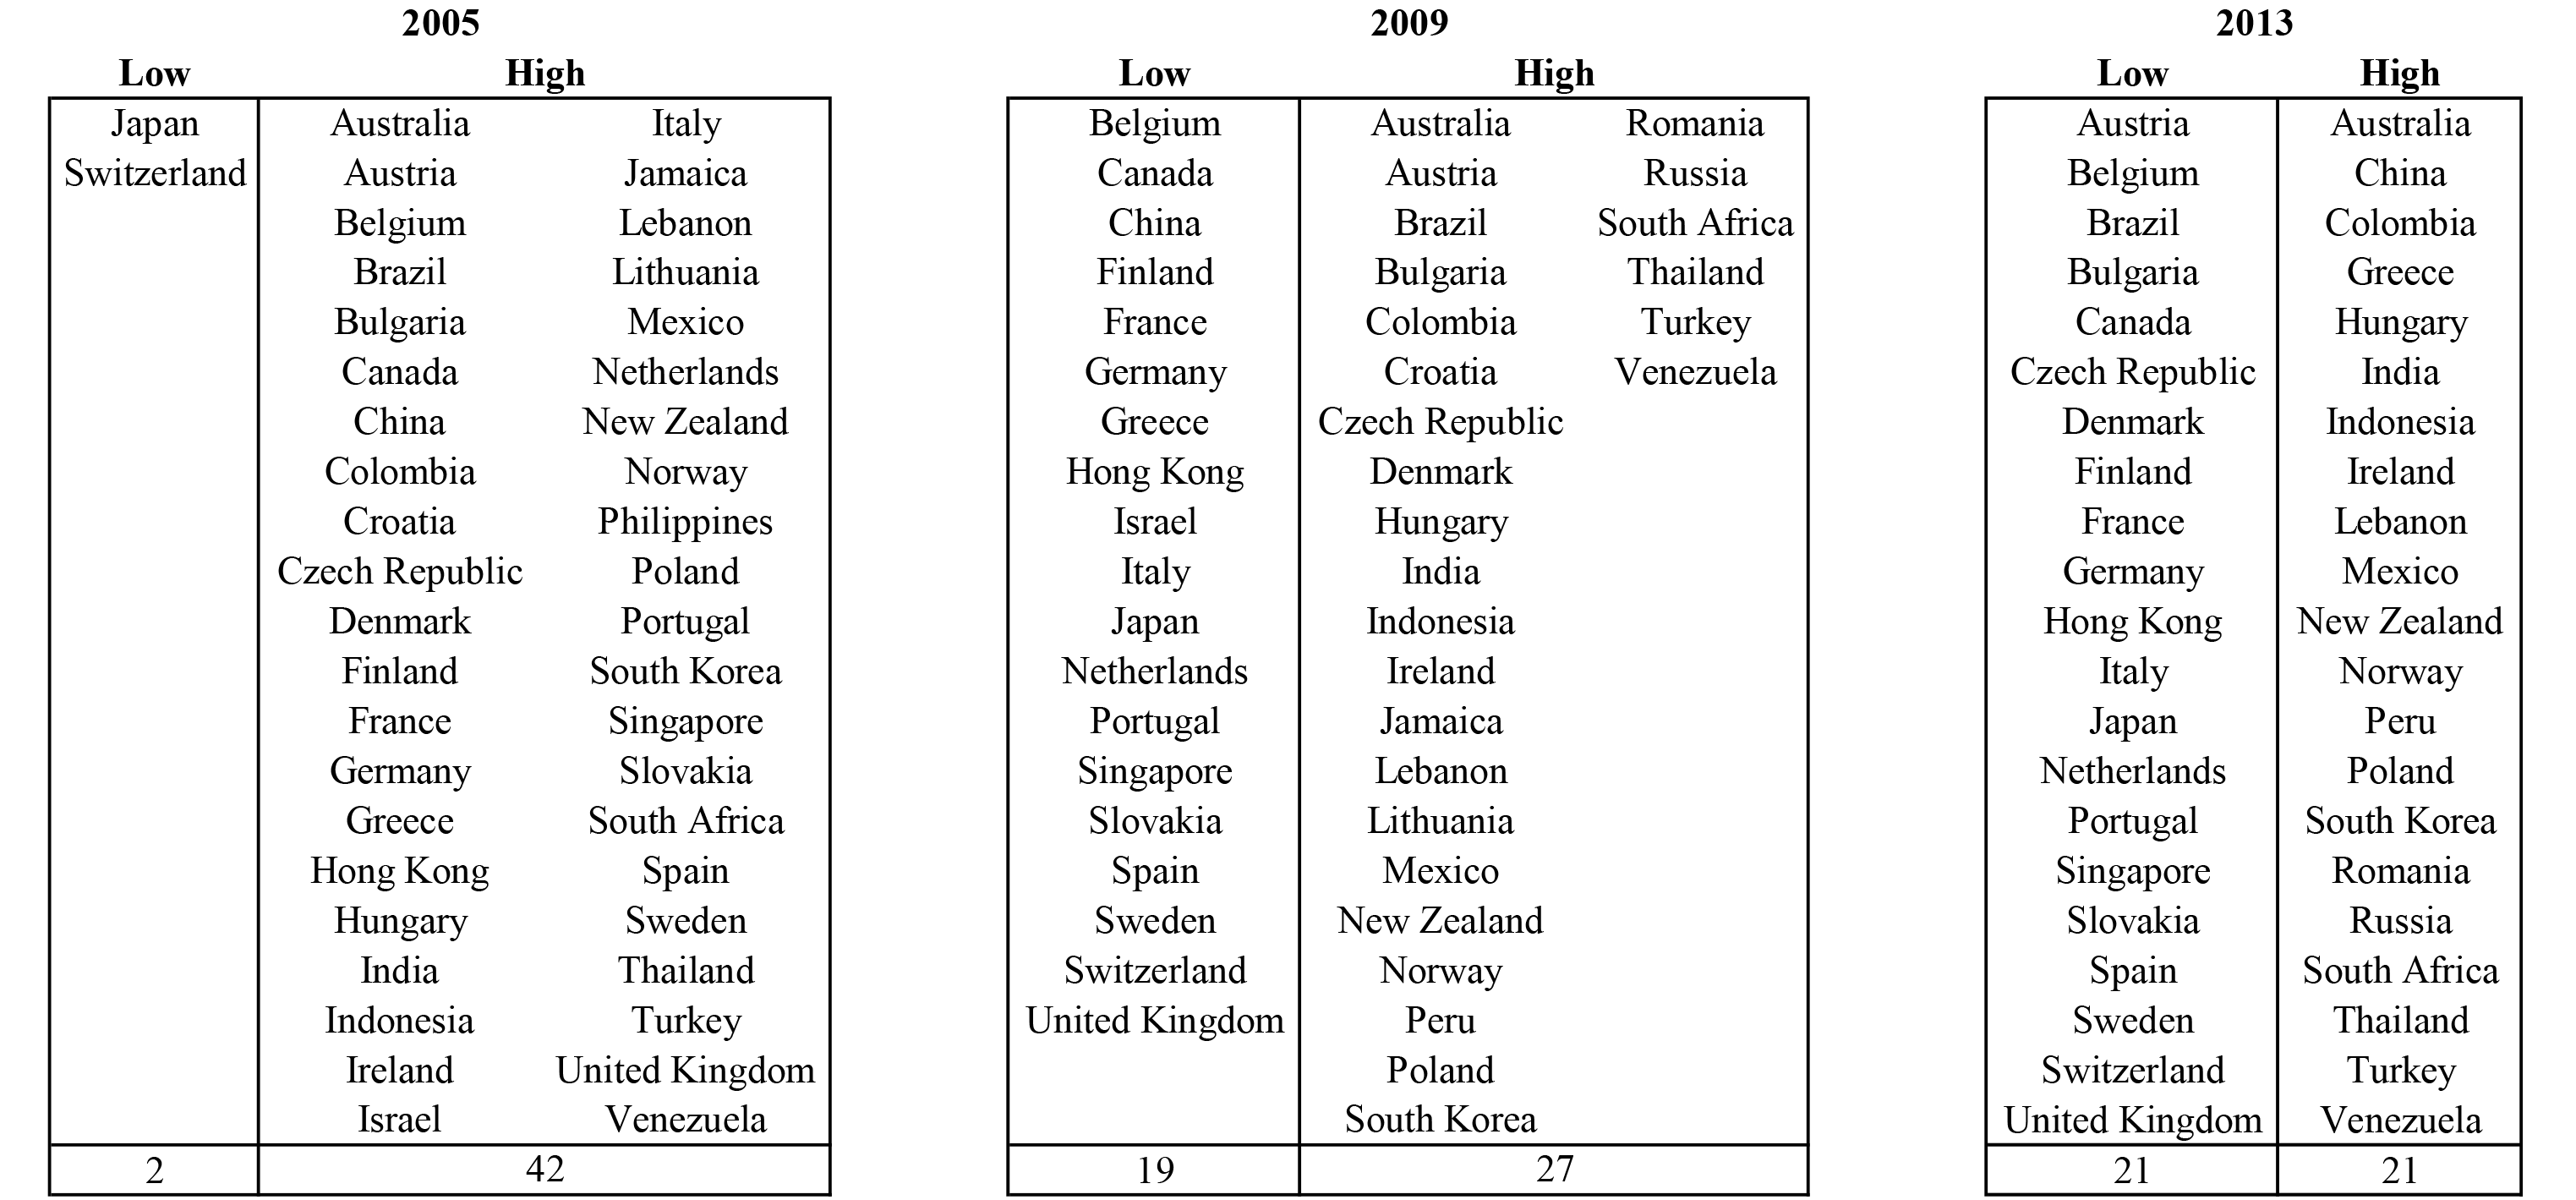 Appendix Figure 1: Country Assignments by 